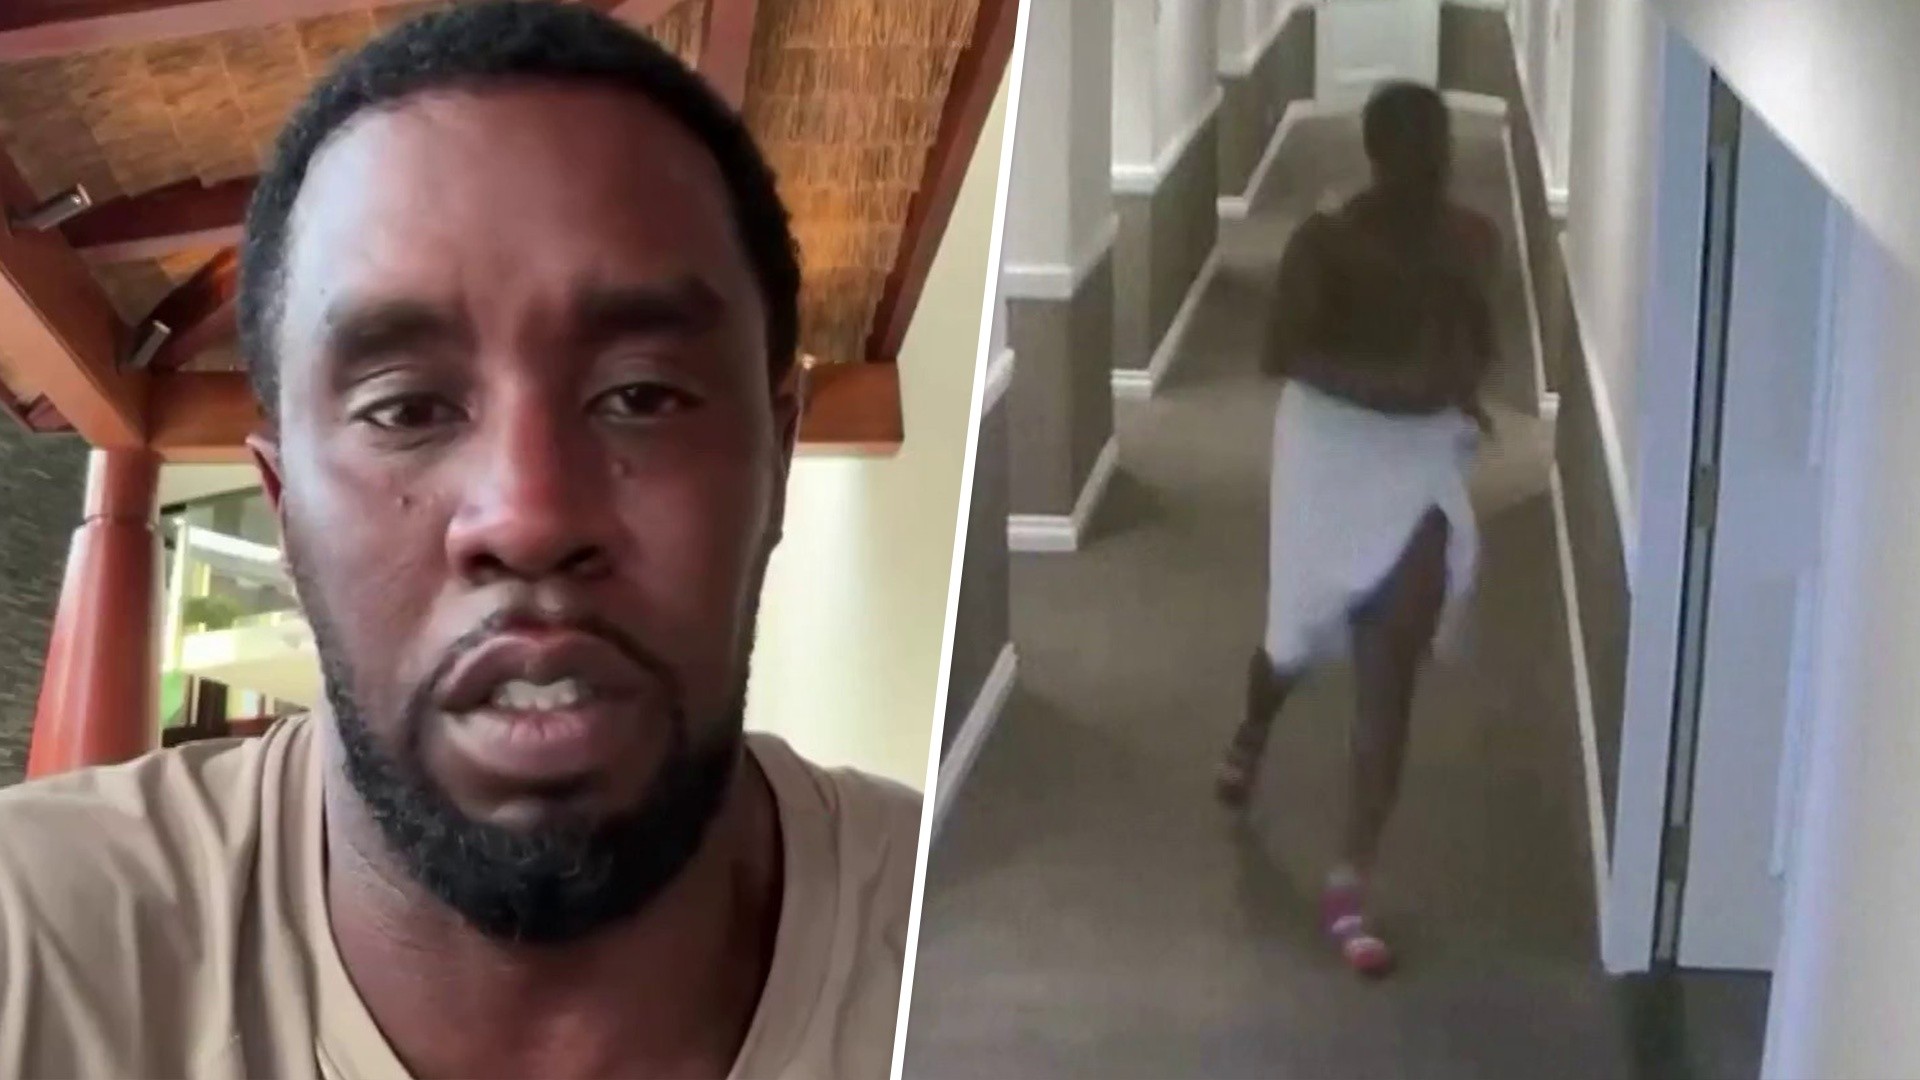 Sean 'Diddy' Combs issues apology after disturbing assault video